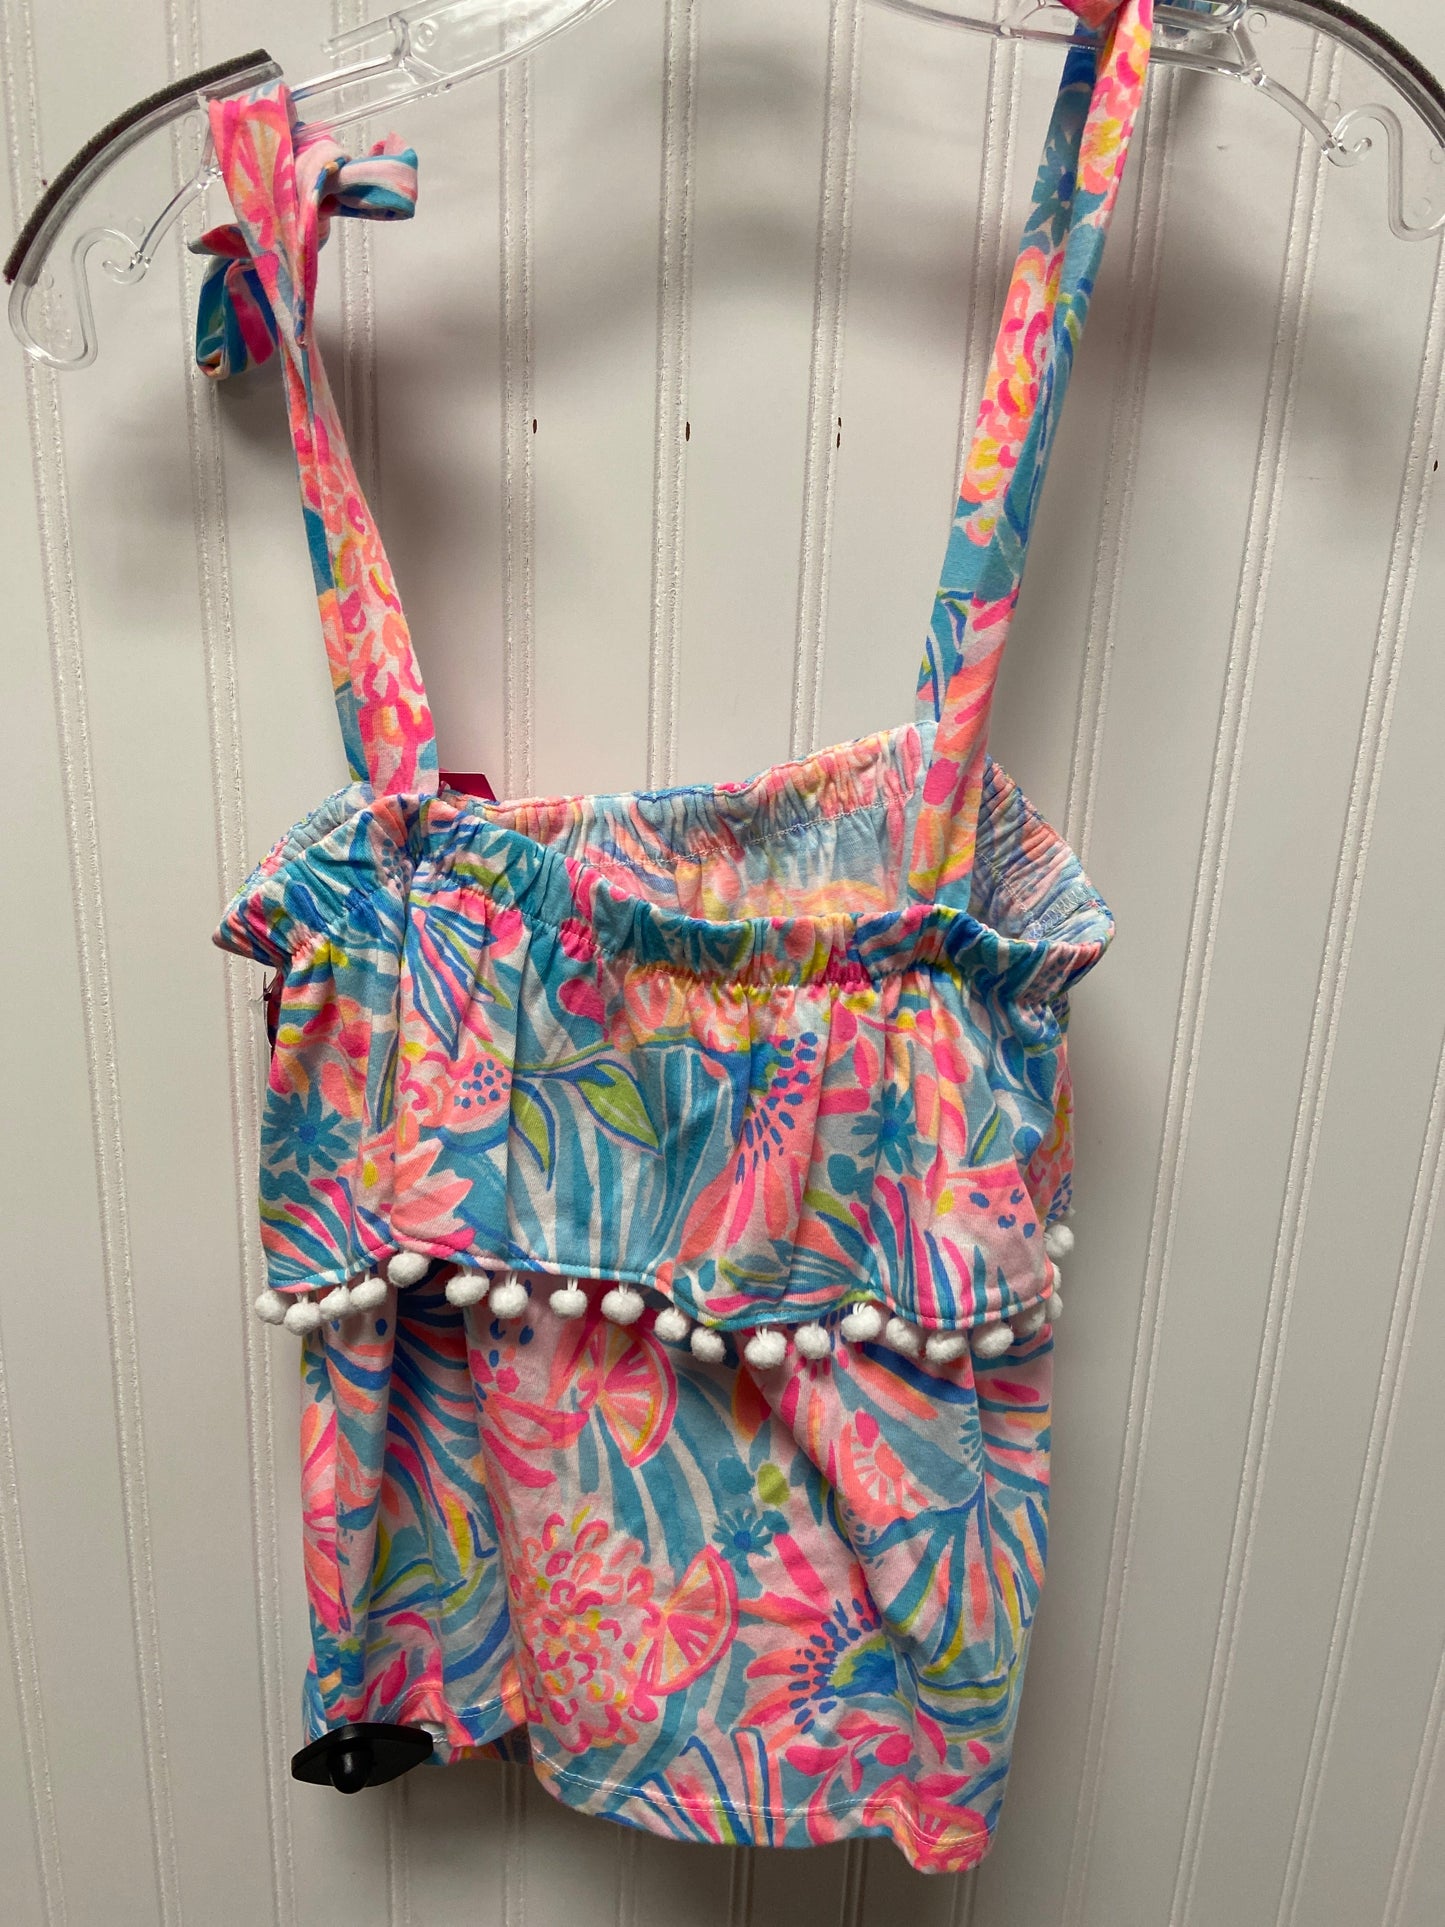 Blue Top Sleeveless Designer Lilly Pulitzer, Size Xs